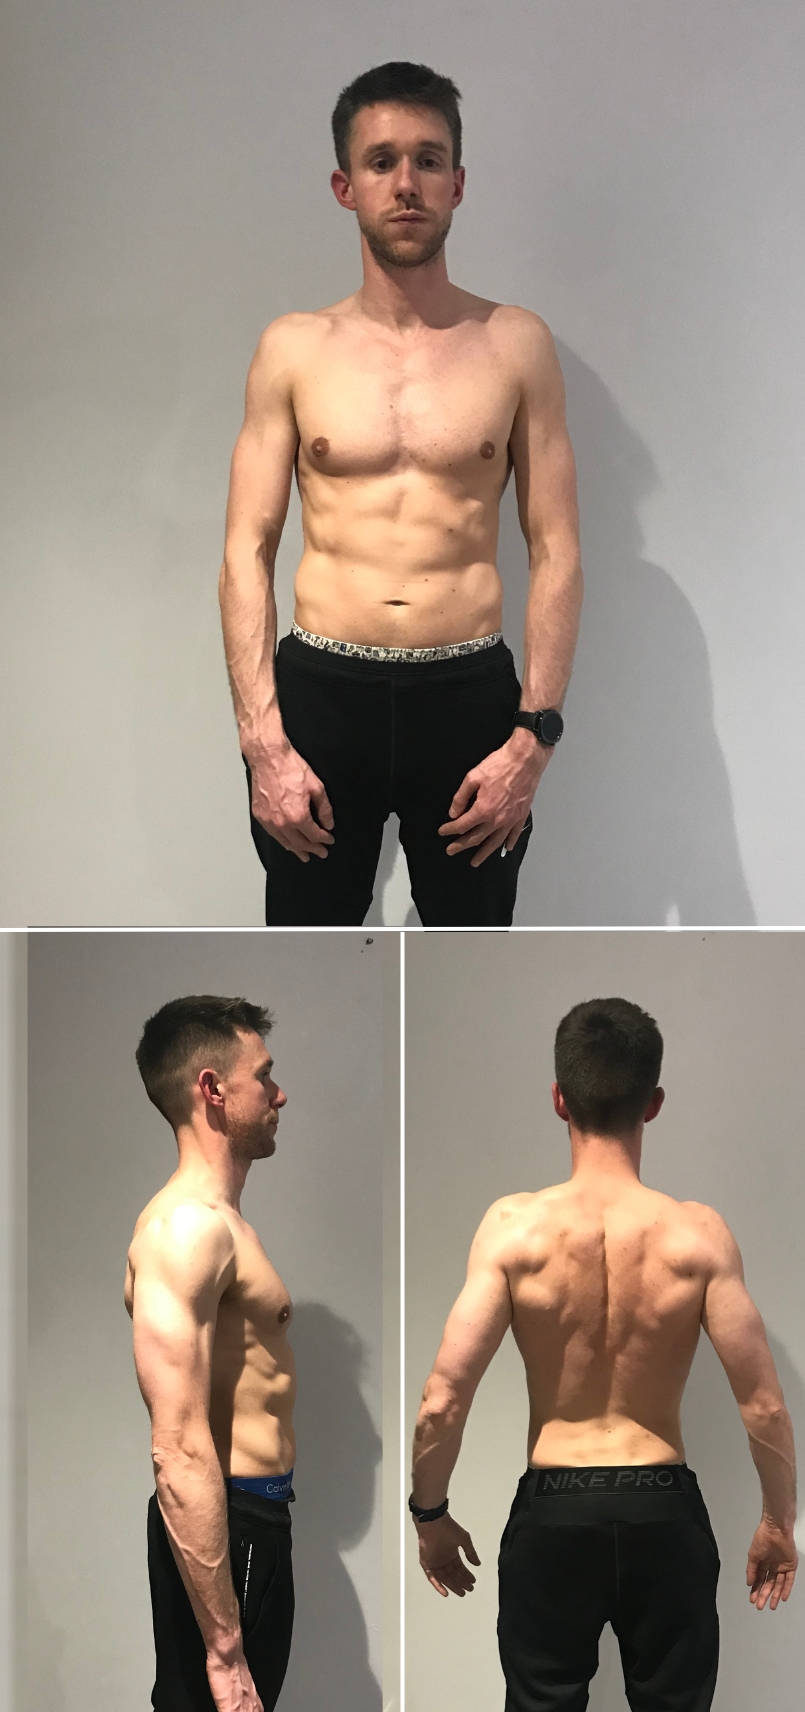 Mike's after personal training transformation pictures